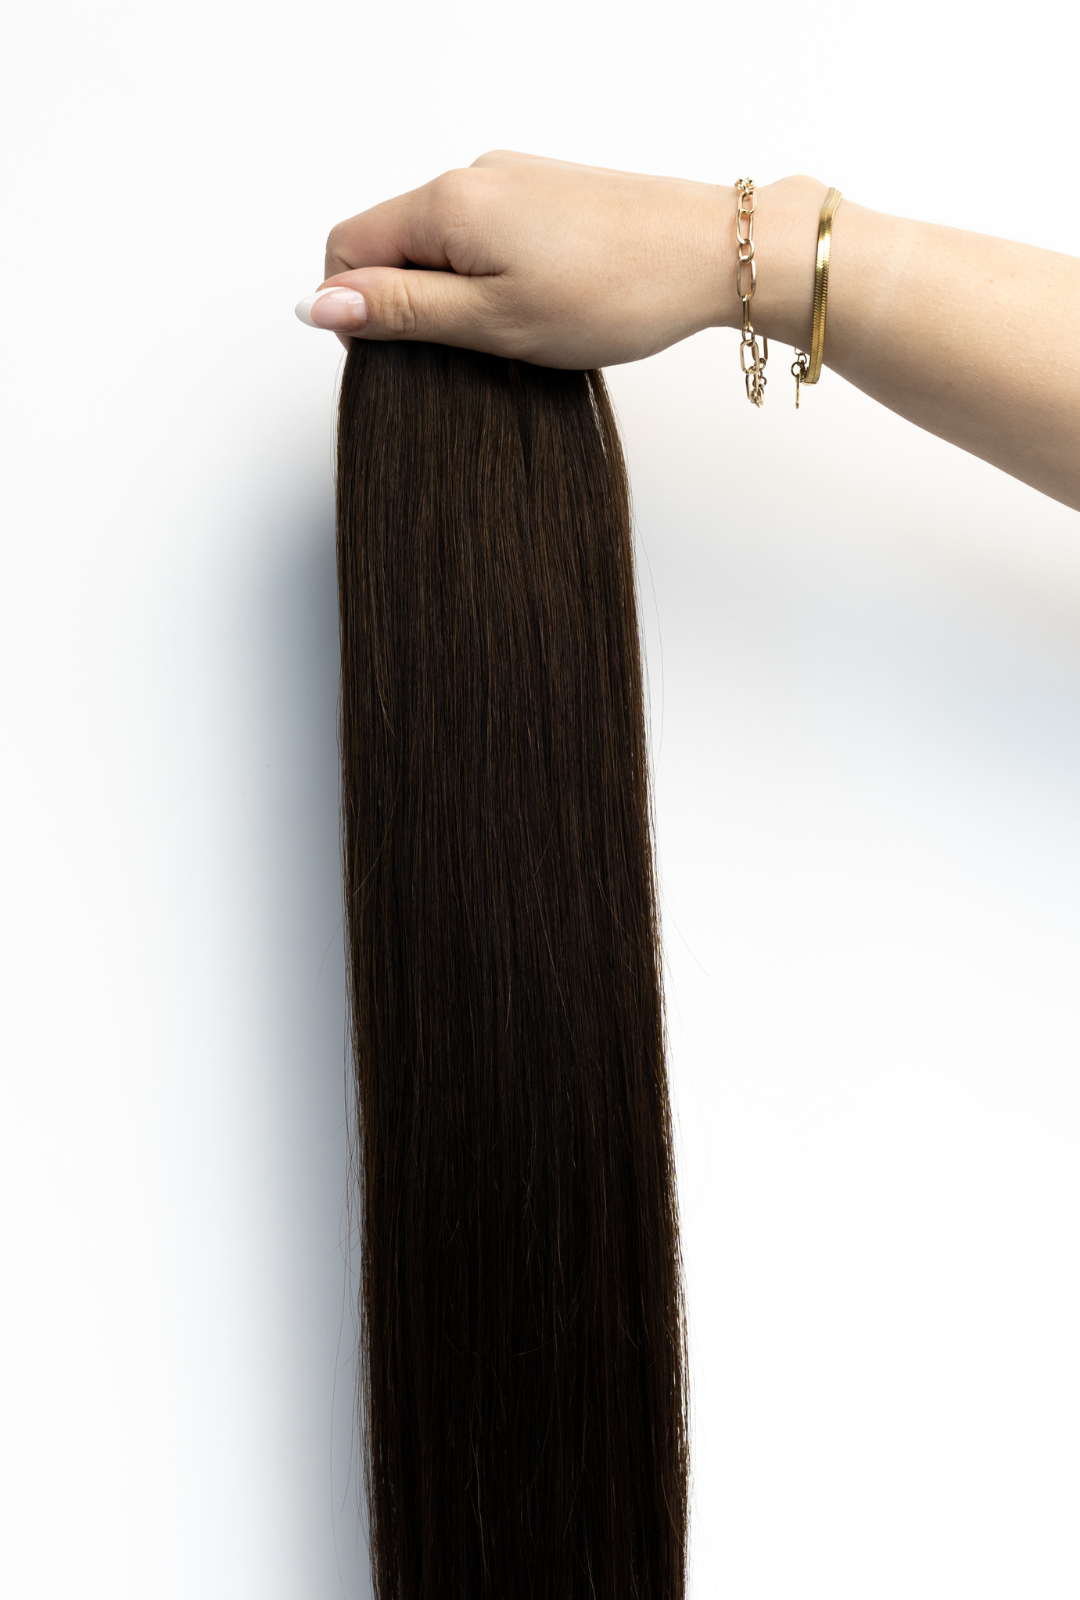 Laced Hair Machine Sewn Weft Extensions #2 (Chocolate)